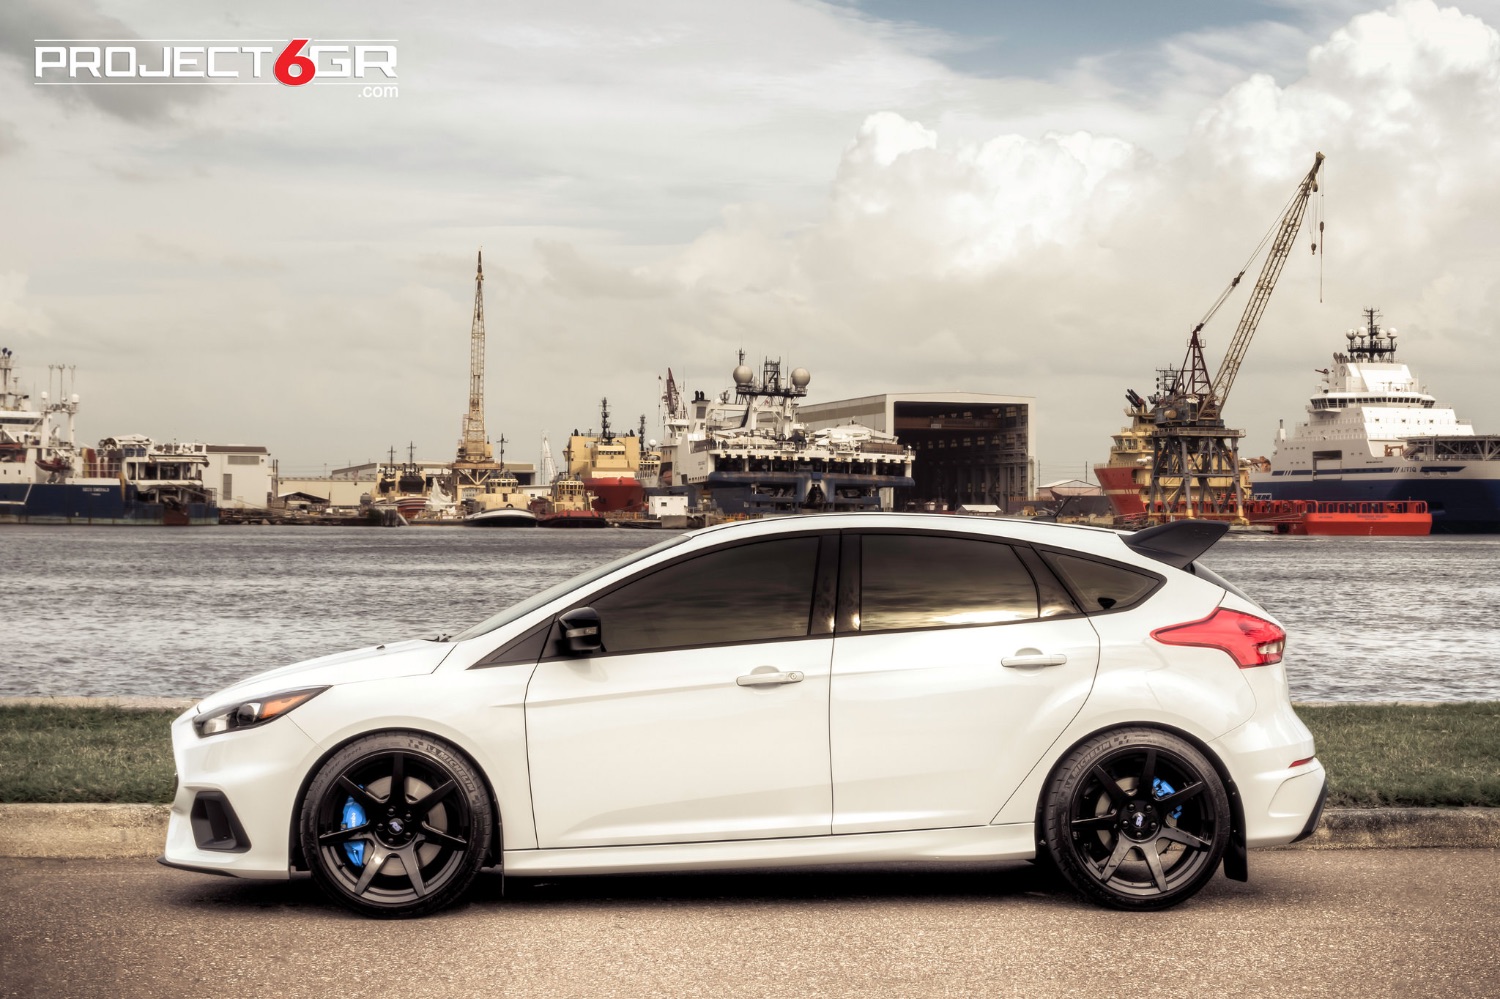 ford-focus-rs-white-project-6gr-seven-wheels-1